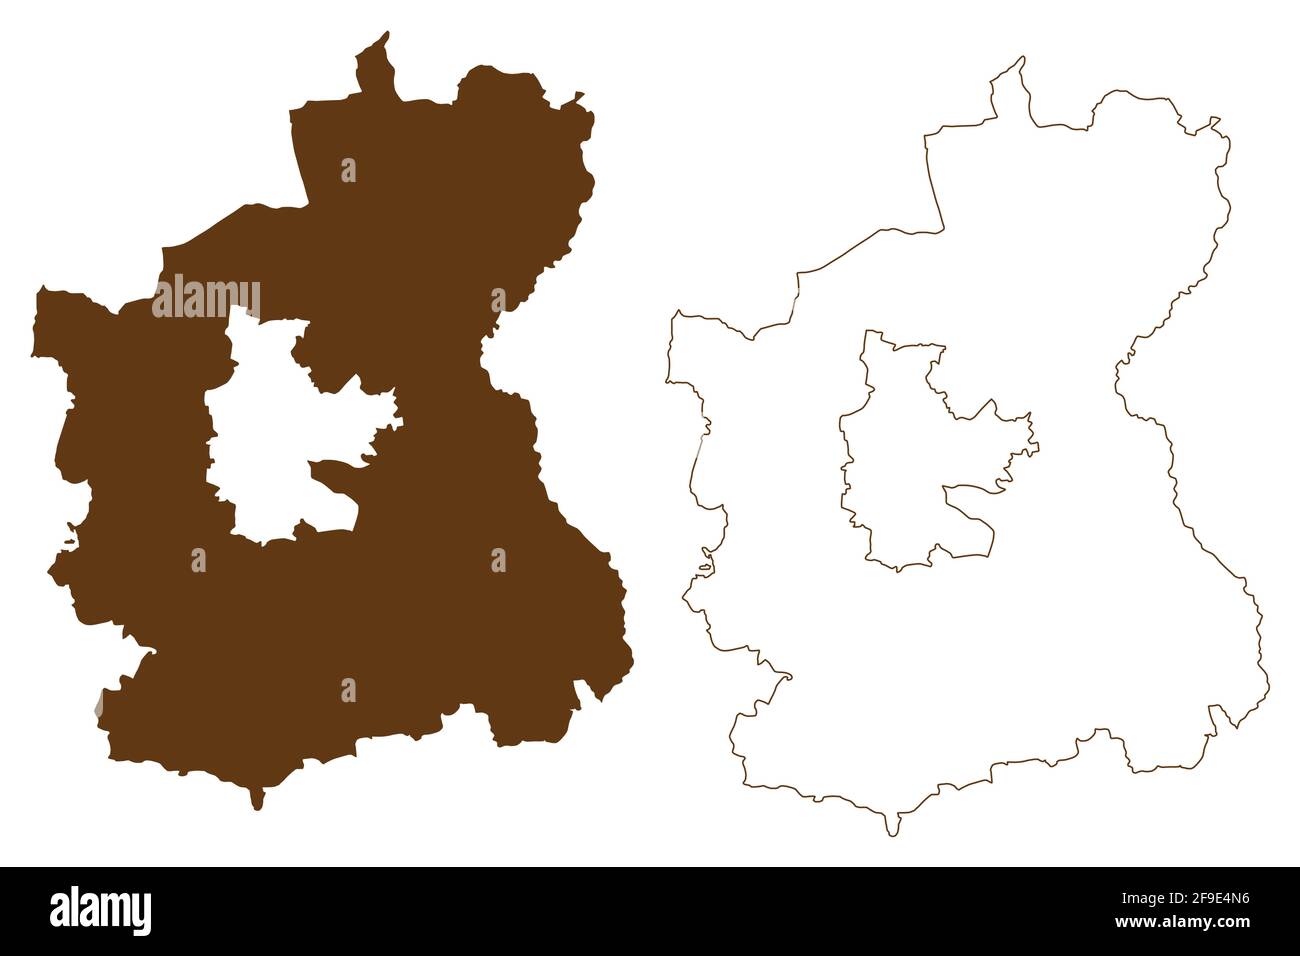 Spree-Neisse district (Federal Republic of Germany, rural district, State of Brandenburg) map vector illustration, scribble sketch Spree Neisse map Stock Vector